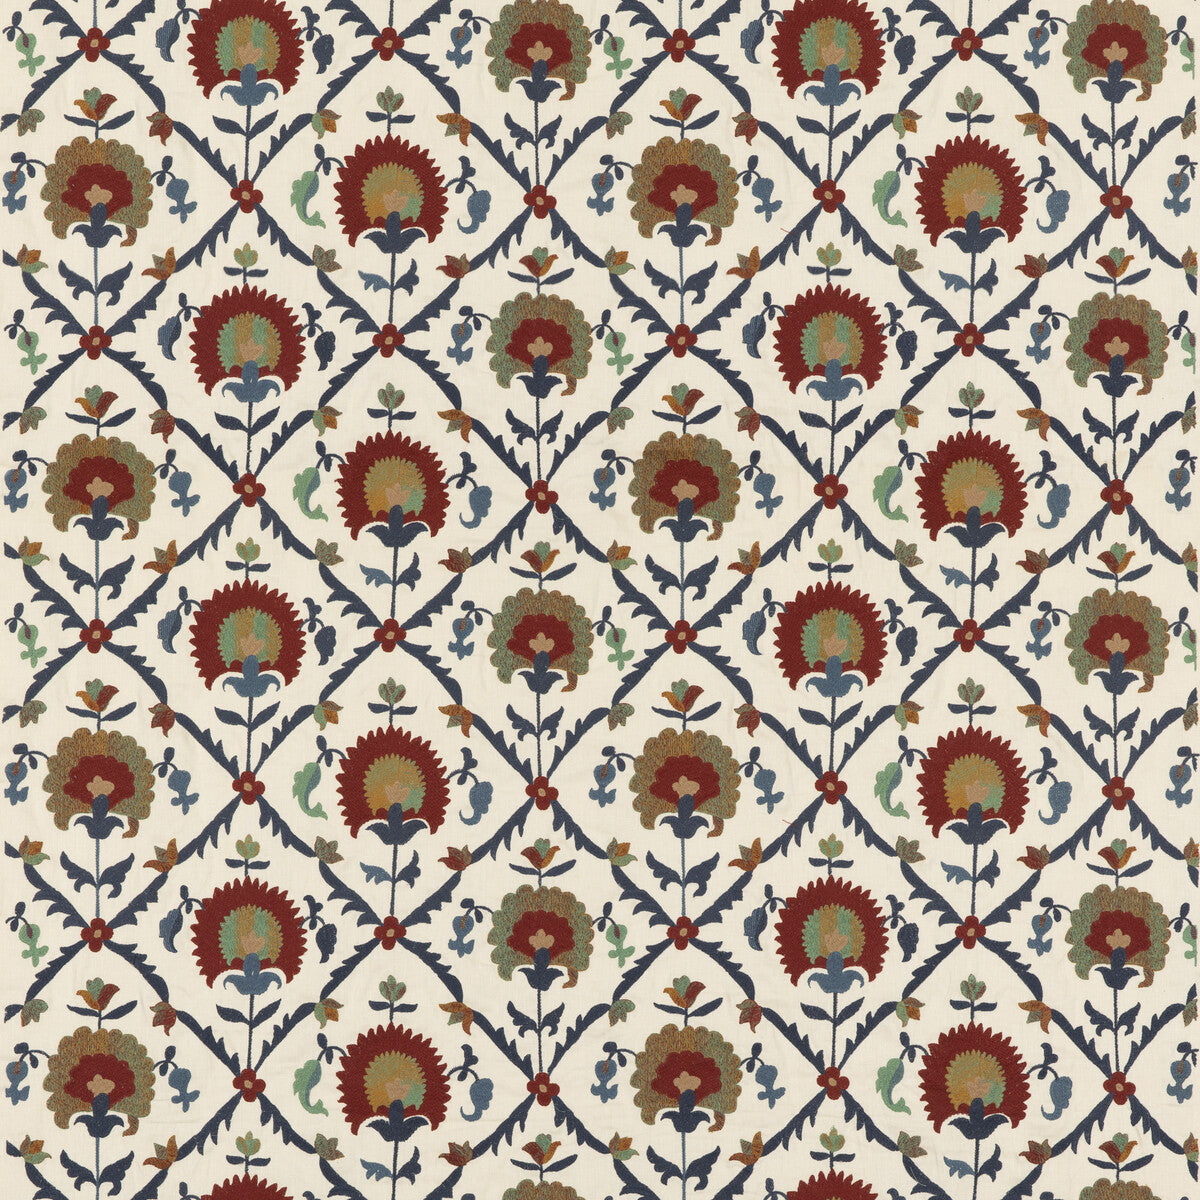 Winchelsea fabric in red/ blue color - pattern BF10905.1.0 - by G P &amp; J Baker in the Portobello collection